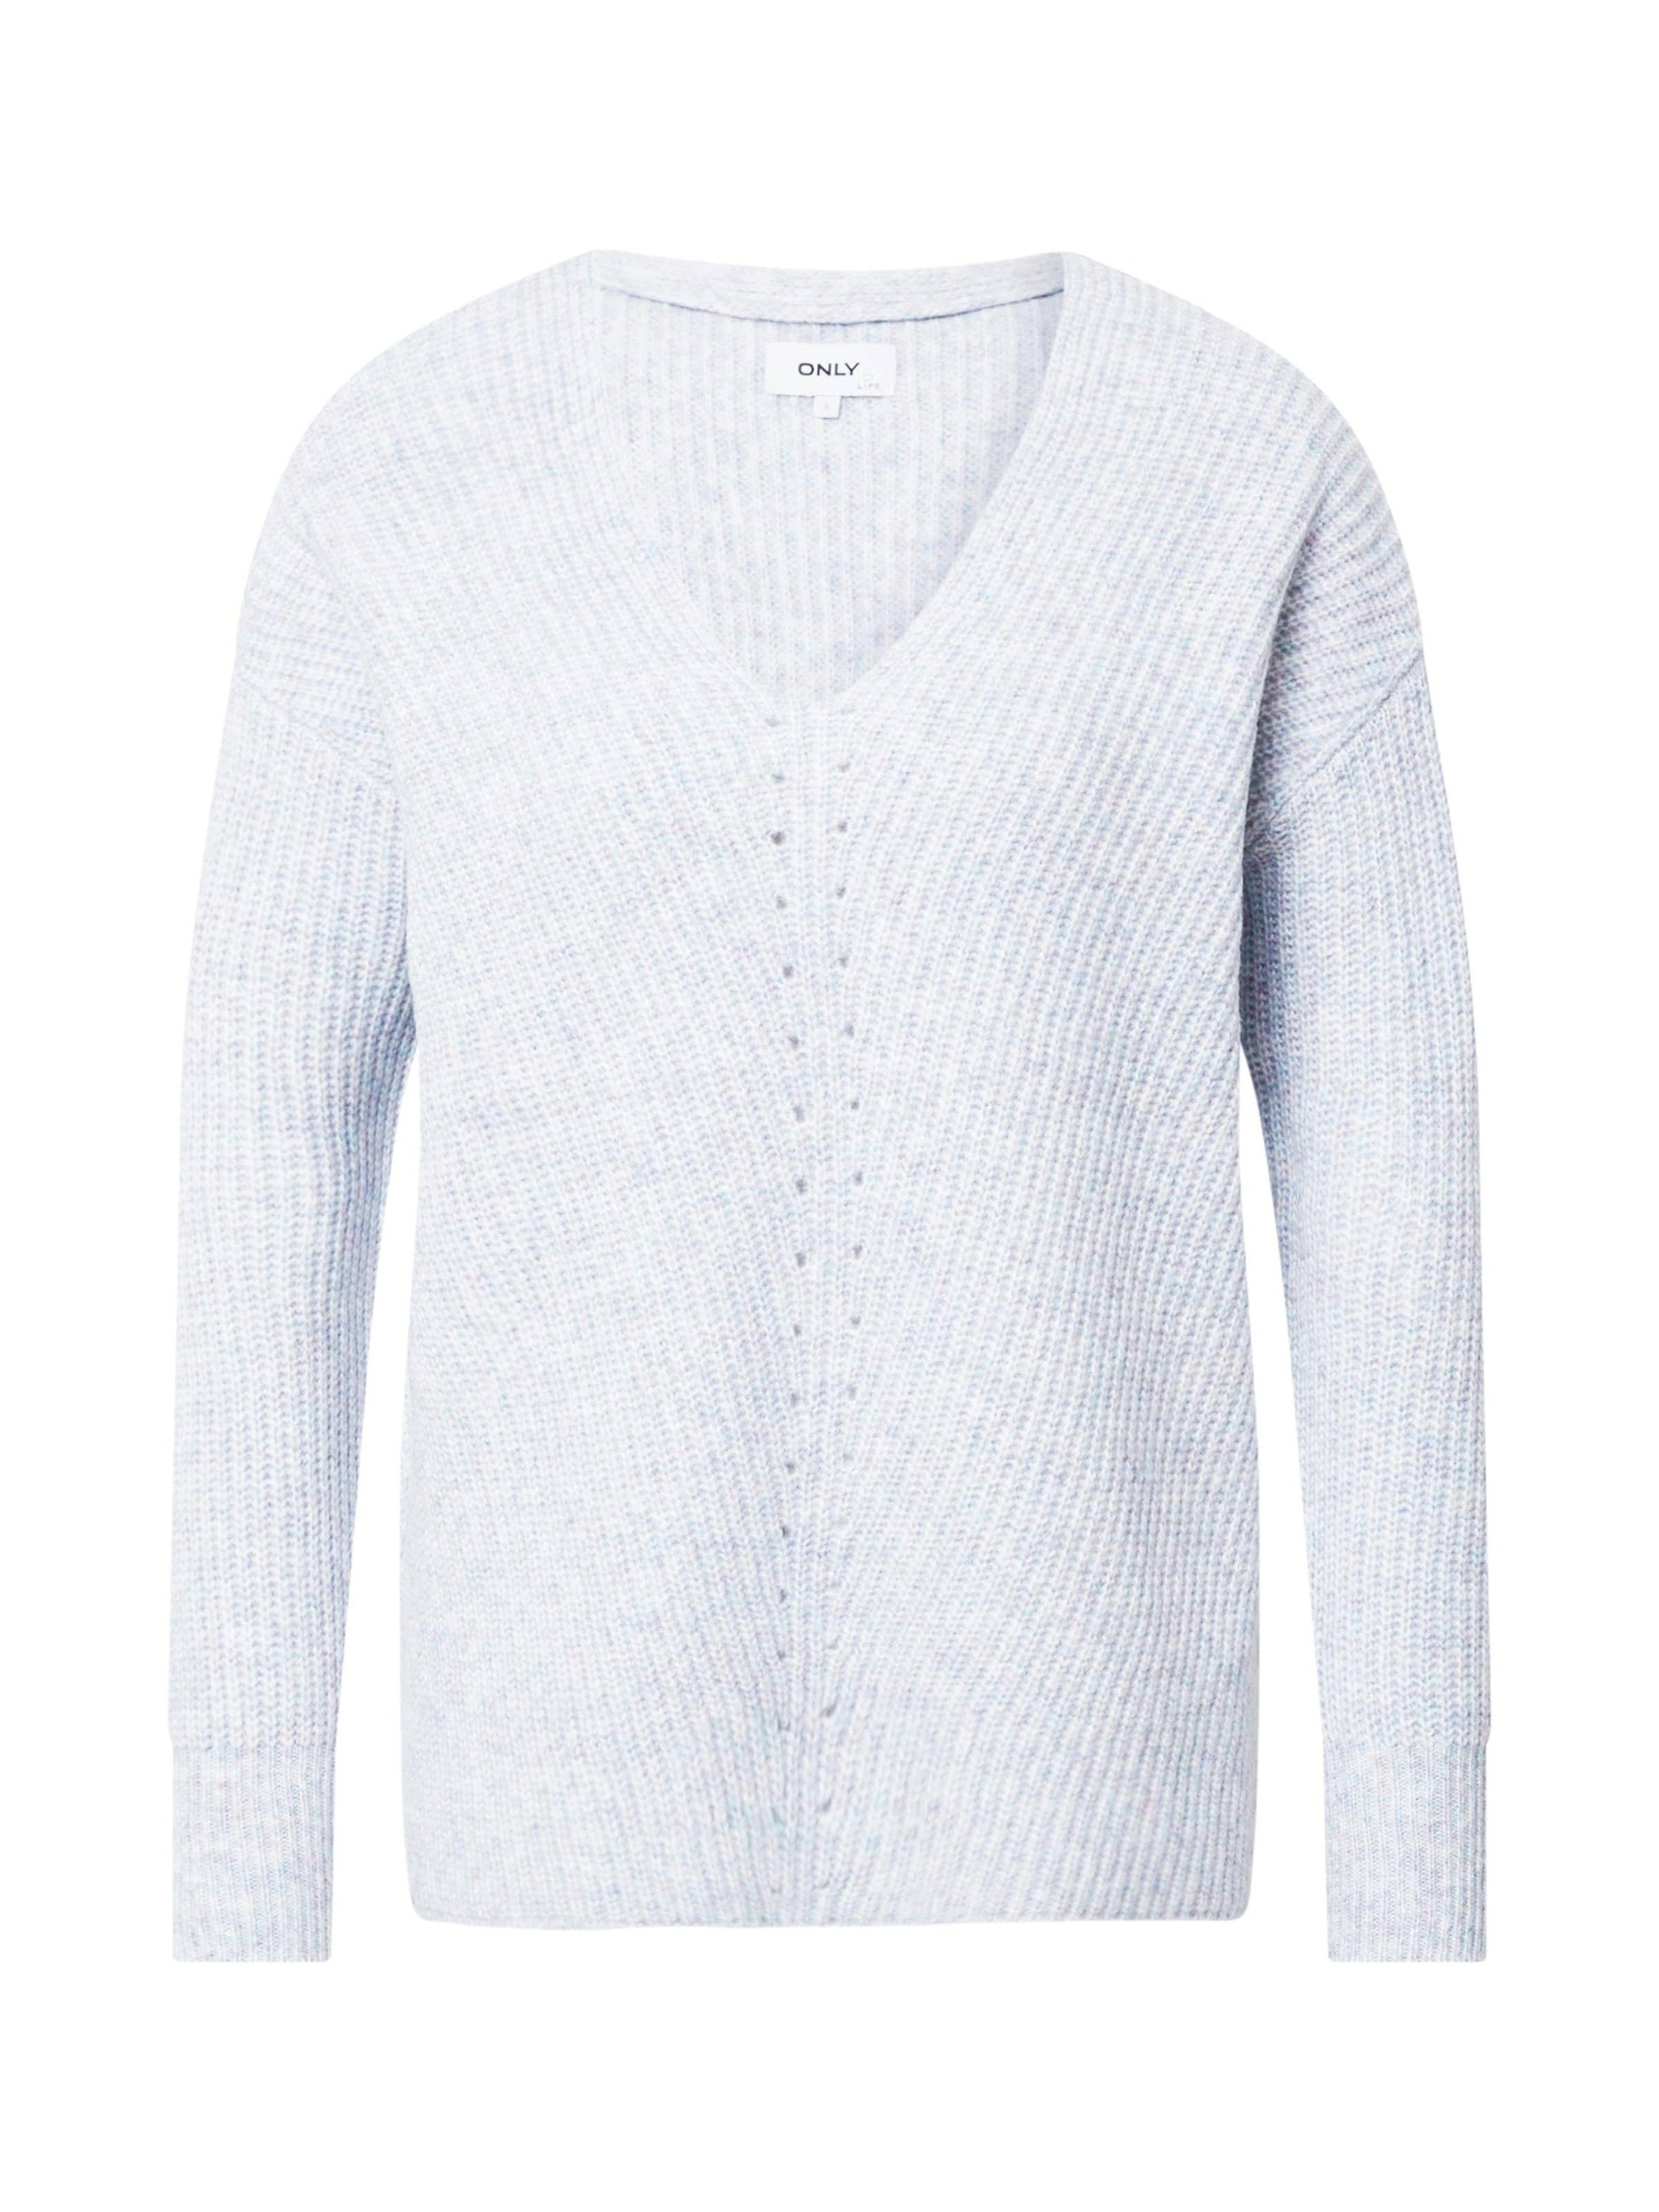 (1-tlg) AIRY ONLY Strickpullover Lochmuster